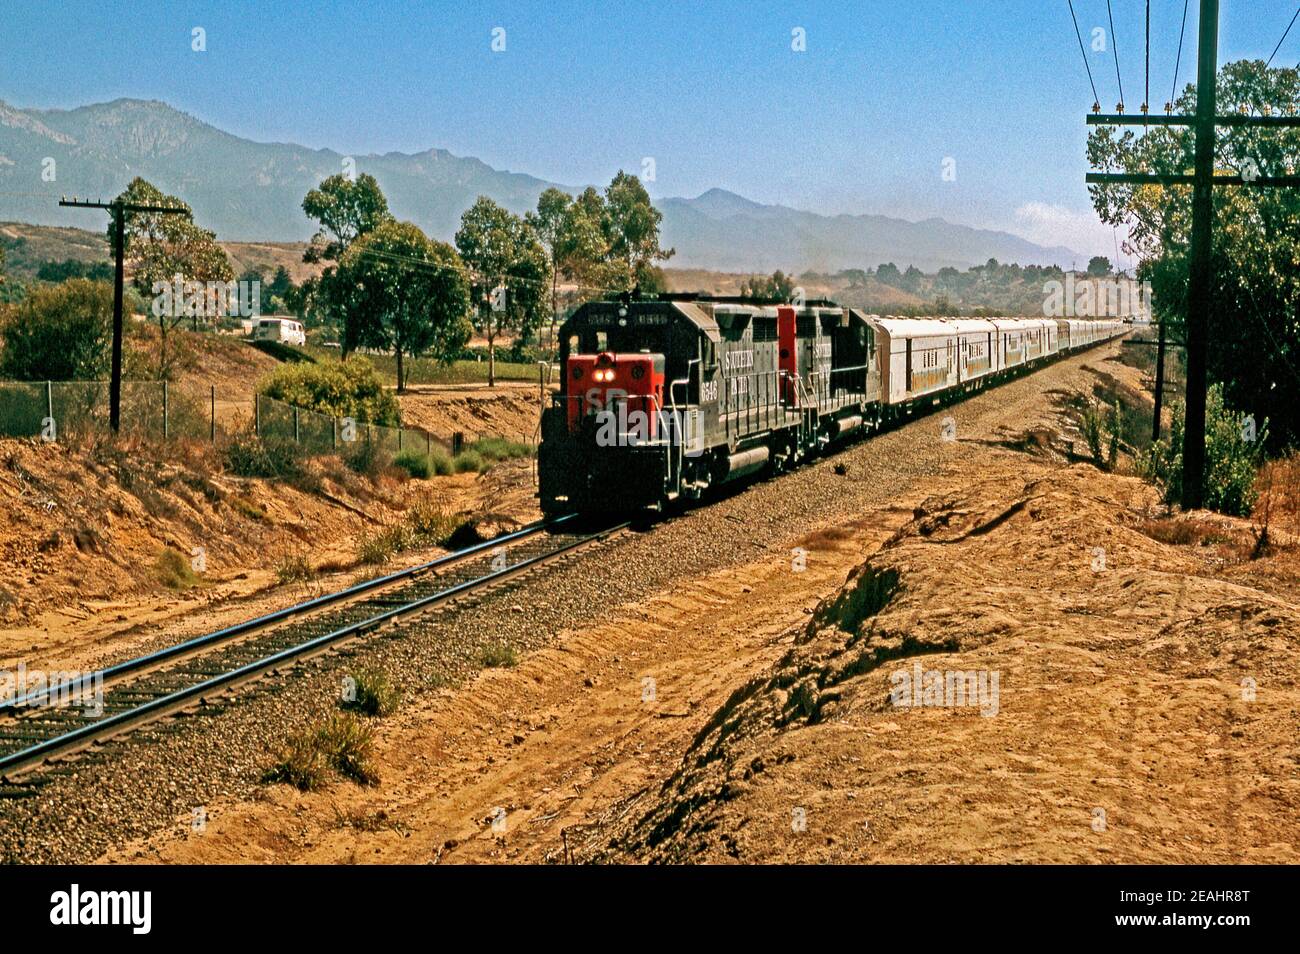 The Ringling Bros and Barnum and Bailey Circus Train in rural USA in 1972. It was called ‘The Greatest Show on Earth’. Trains were first used in 1872 and this train is pulled by two Southern Pacific GP35 diesel locomotives. The trains stretched to over a mile long. This image is from an old American amateur Kodak 35mm colour transparency. Stock Photo